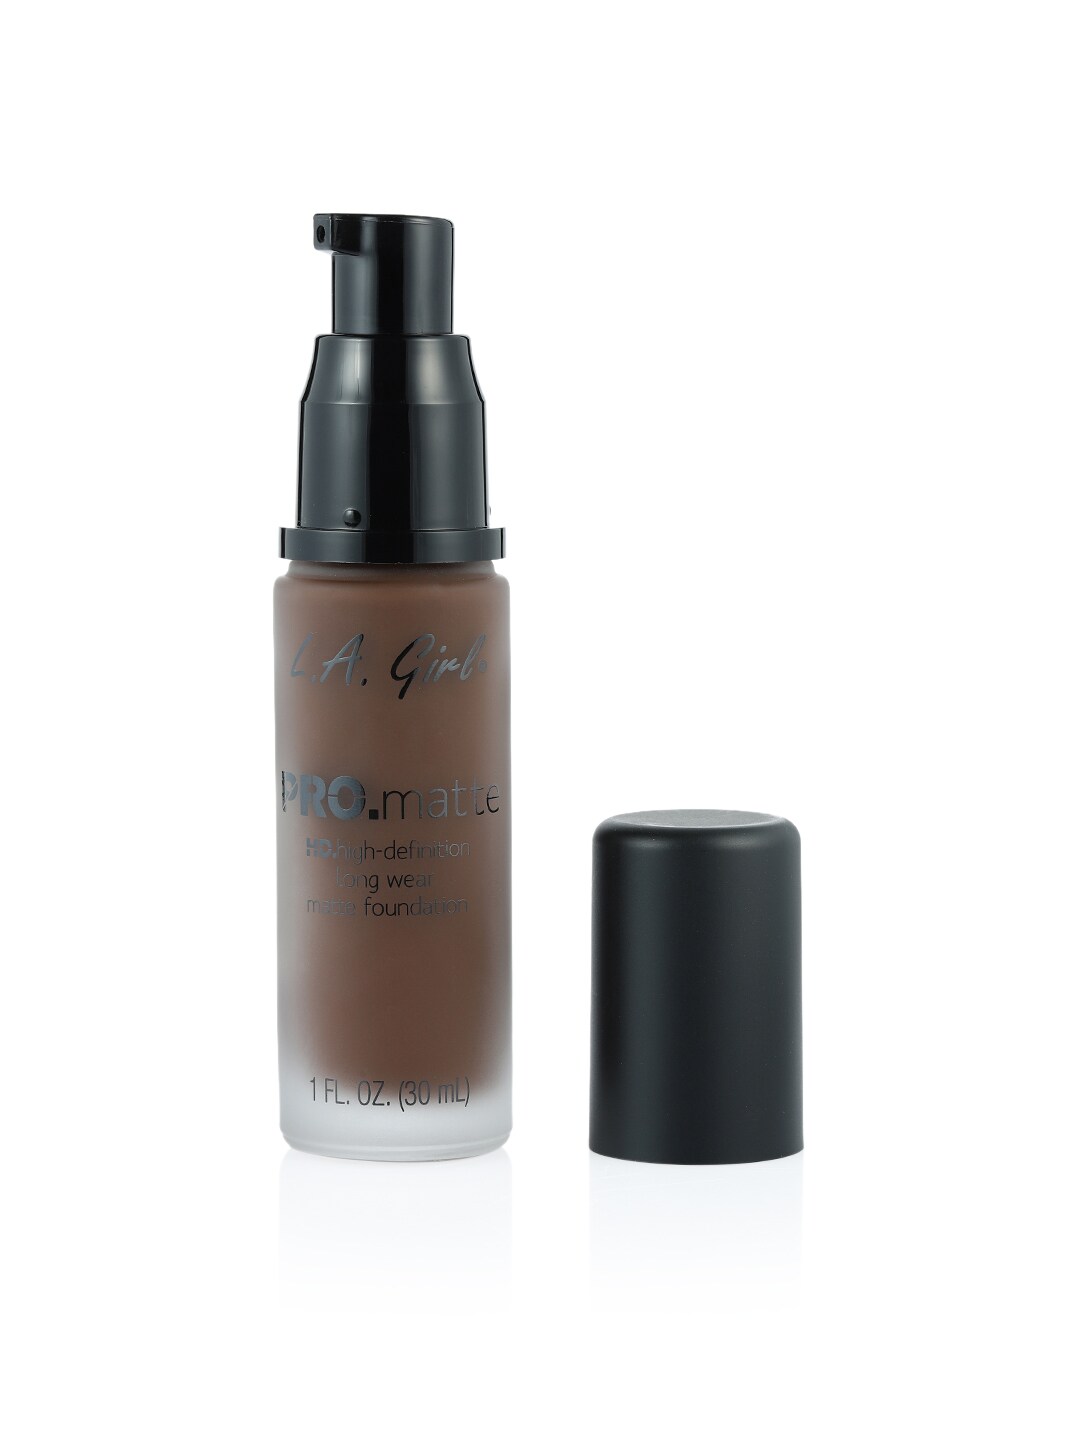 L.A Girl Pro Matte High Definition Foundation - Ebony Price in India